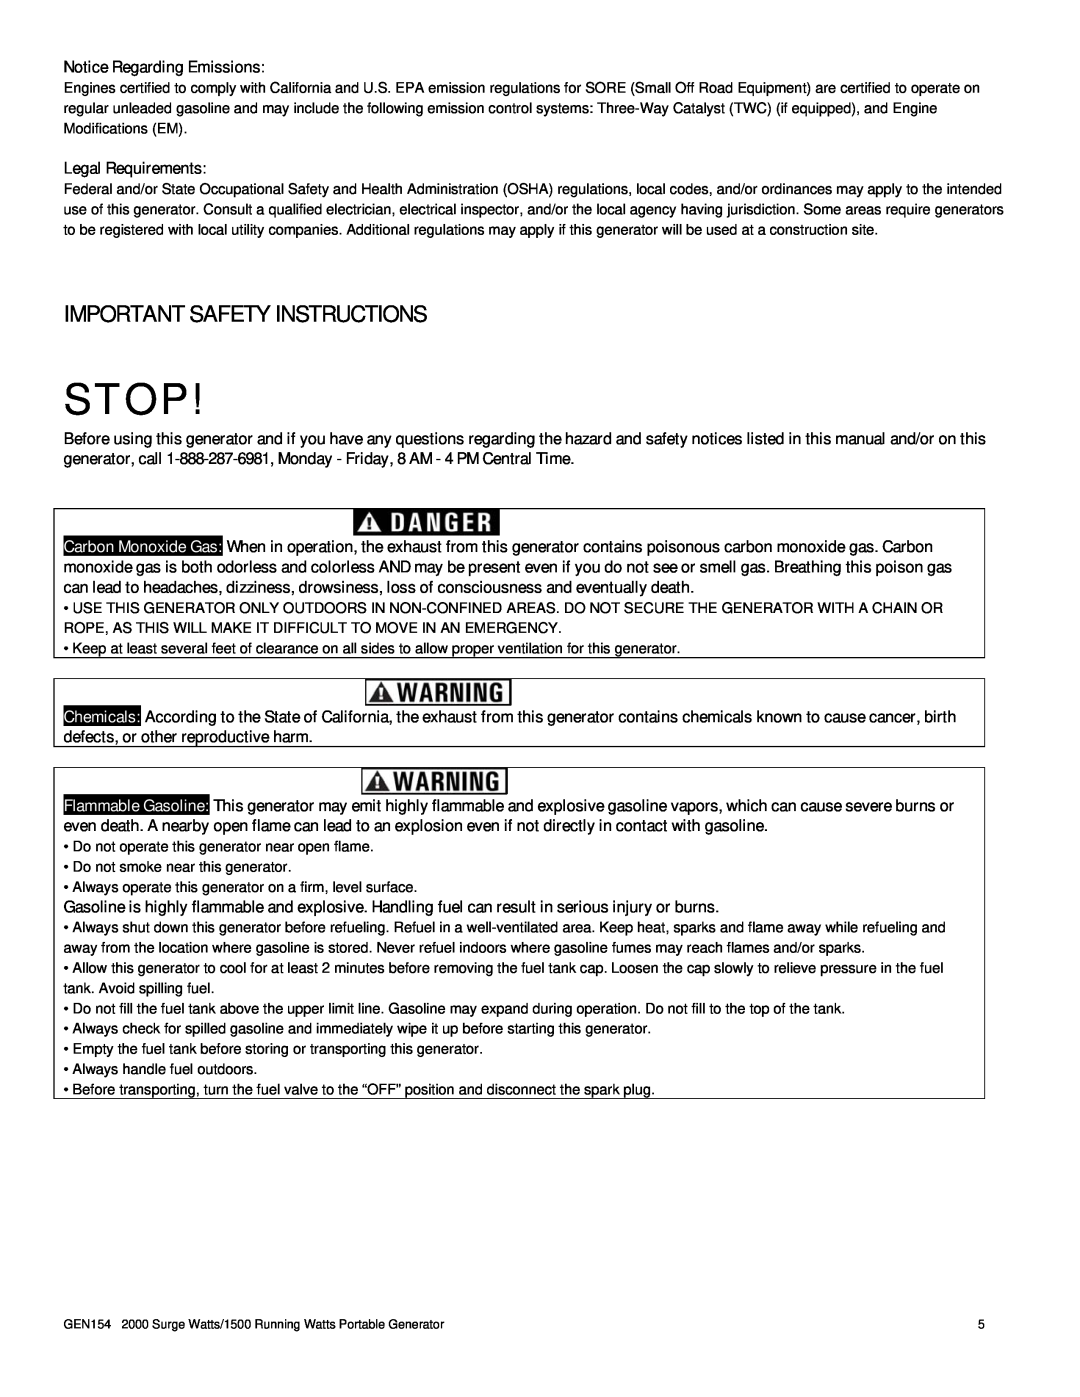 Buffalo Tools GEN154 instruction manual Stop, Important Safety Instructions, Notice Regarding Emissions, Legal Requirements 